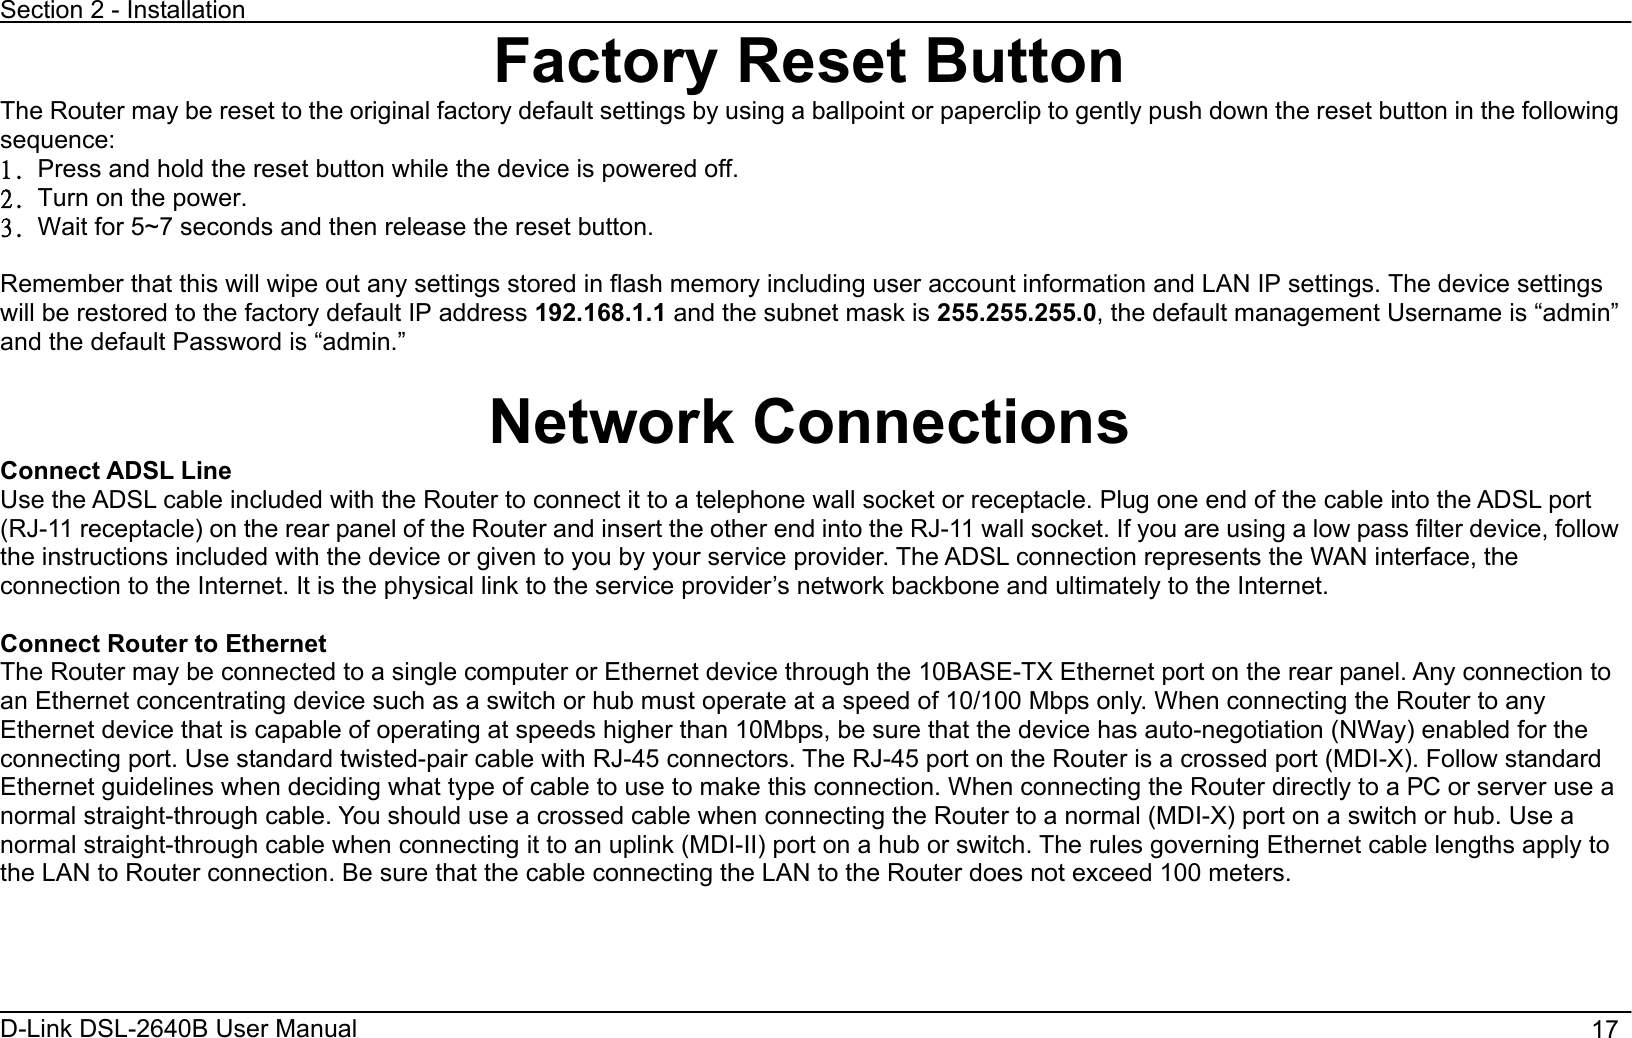 Section 2 - Installation D-Link DSL-2640B User Manual                                       17Factory Reset ButtonThe Router may be reset to the original factory default settings by using a ballpoint or paperclip to gently push down the reset button in the following sequence:2/ Press and hold the reset button while the device is powered off. 3/ Turn on the power. 4/ Wait for 5~7 seconds and then release the reset button.   Remember that this will wipe out any settings stored in flash memory including user account information and LAN IP settings. The device settings will be restored to the factory default IP address 192.168.1.1 and the subnet mask is 255.255.255.0, the default management Username is “admin” and the default Password is “admin.” Network Connections   Connect ADSL Line Use the ADSL cable included with the Router to connect it to a telephone wall socket or receptacle. Plug one end of the cable into the ADSL port (RJ-11 receptacle) on the rear panel of the Router and insert the other end into the RJ-11 wall socket. If you are using a low pass filter device, follow the instructions included with the device or given to you by your service provider. The ADSL connection represents the WAN interface, the connection to the Internet. It is the physical link to the service provider’s network backbone and ultimately to the Internet. Connect Router to Ethernet   The Router may be connected to a single computer or Ethernet device through the 10BASE-TX Ethernet port on the rear panel. Any connection to an Ethernet concentrating device such as a switch or hub must operate at a speed of 10/100 Mbps only. When connecting the Router to any Ethernet device that is capable of operating at speeds higher than 10Mbps, be sure that the device has auto-negotiation (NWay) enabled for the connecting port. Use standard twisted-pair cable with RJ-45 connectors. The RJ-45 port on the Router is a crossed port (MDI-X). Follow standard Ethernet guidelines when deciding what type of cable to use to make this connection. When connecting the Router directly to a PC or server use a normal straight-through cable. You should use a crossed cable when connecting the Router to a normal (MDI-X) port on a switch or hub. Use a normal straight-through cable when connecting it to an uplink (MDI-II) port on a hub or switch. The rules governing Ethernet cable lengths apply to the LAN to Router connection. Be sure that the cable connecting the LAN to the Router does not exceed 100 meters. 